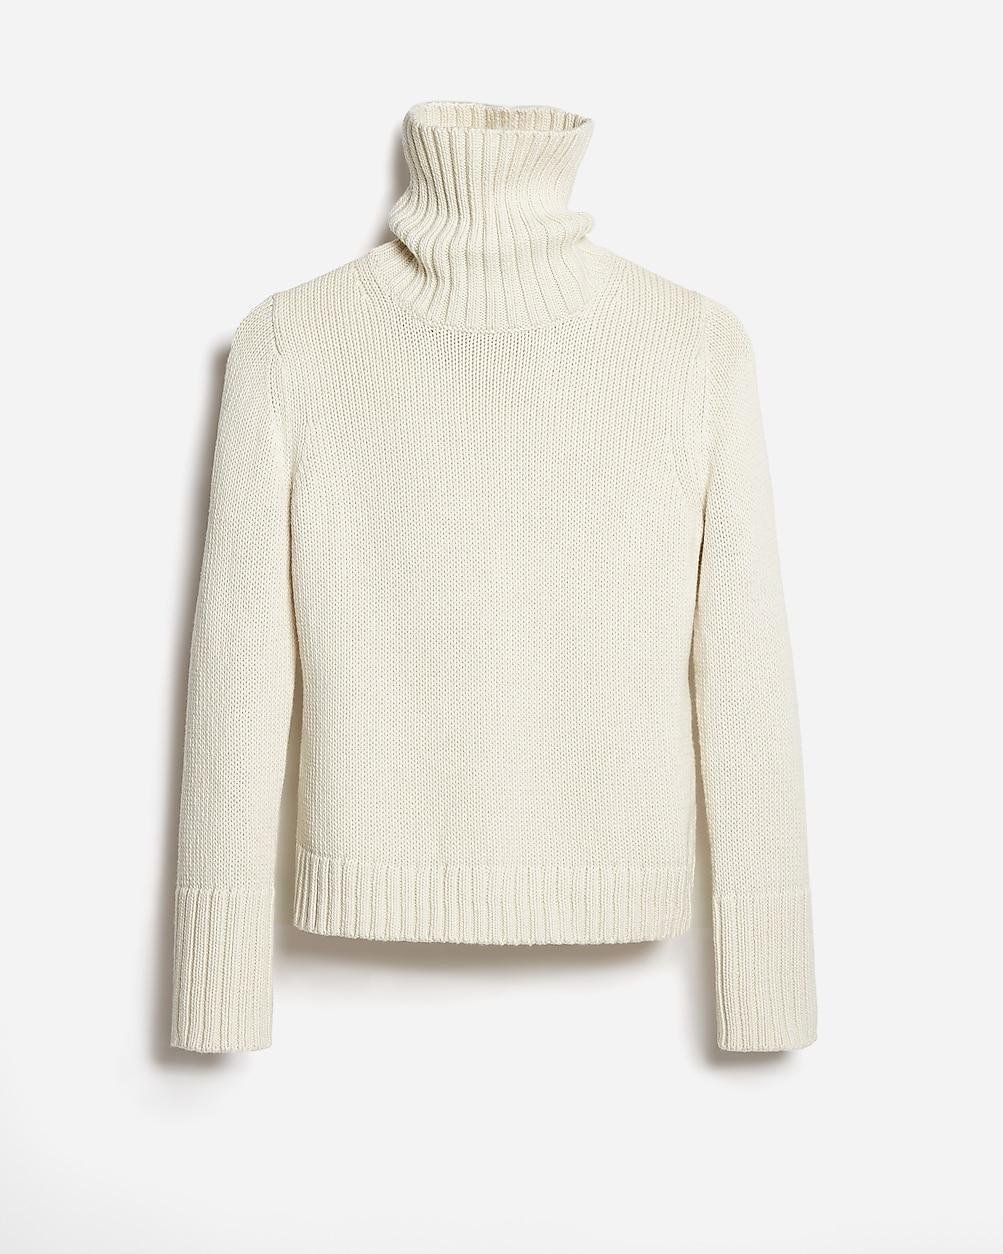 State of Cotton NYC Tisbury turtleneck by J.CREW